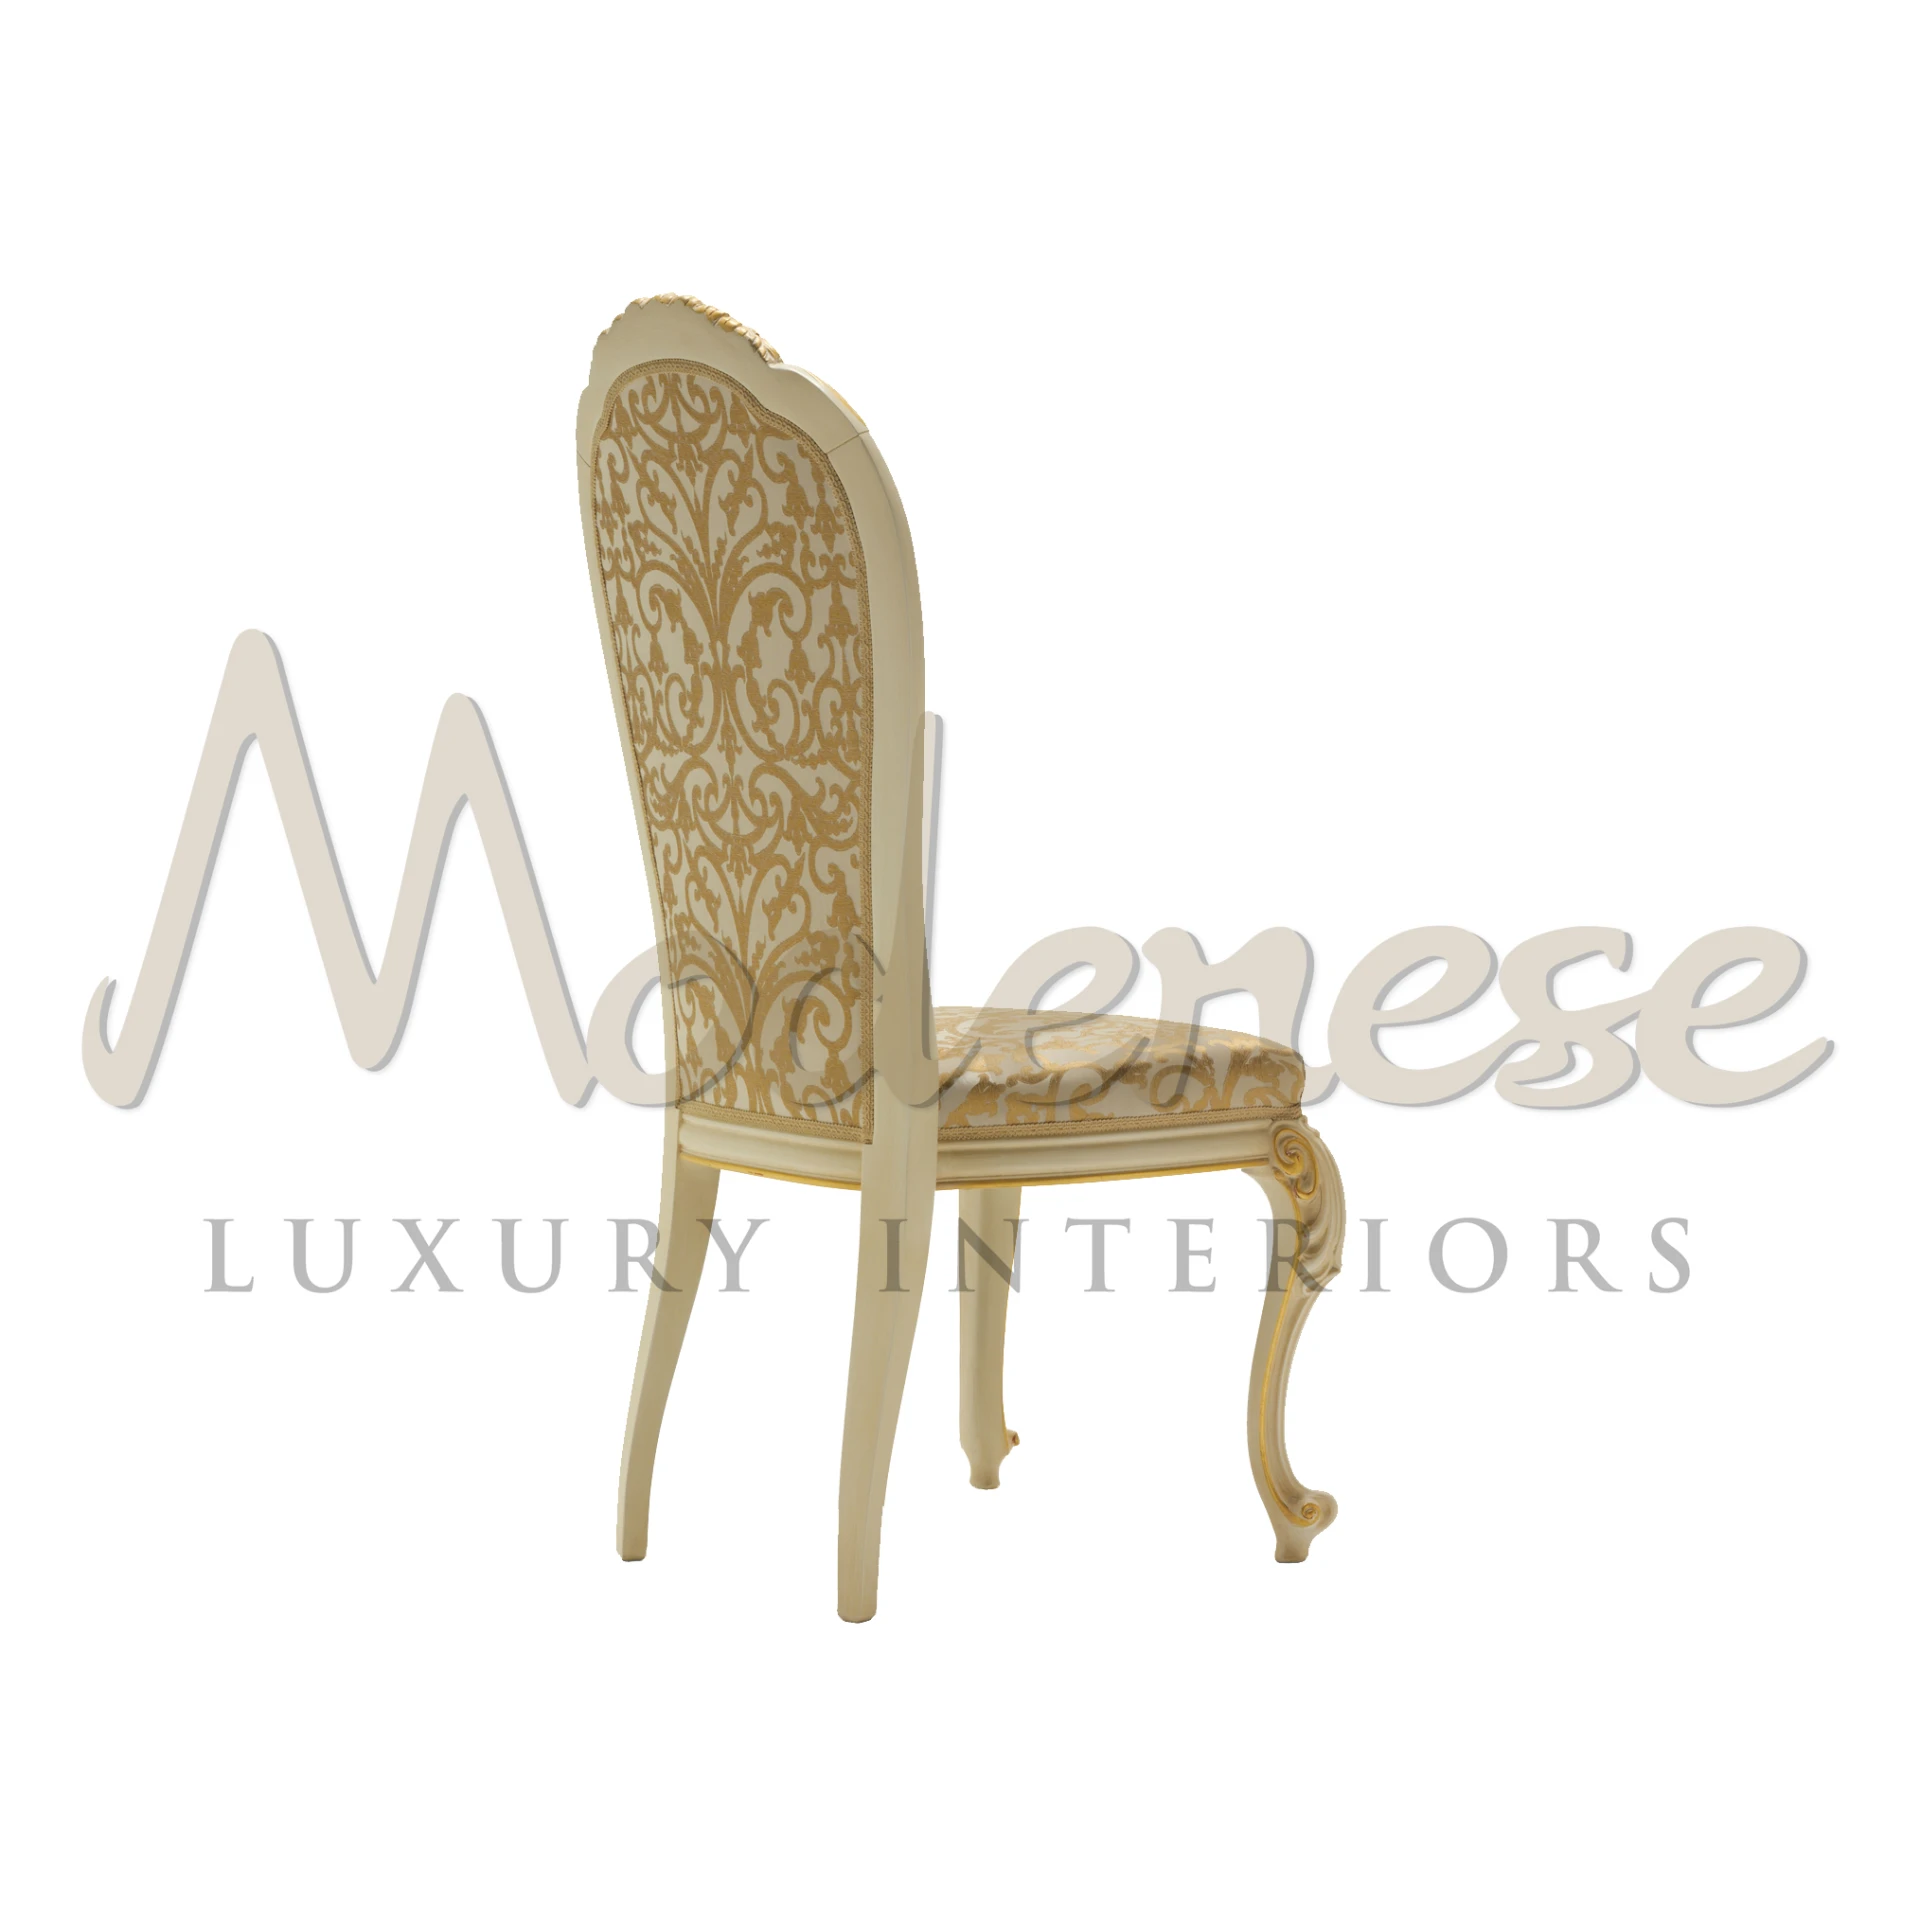 Luxury Venetian Style chair with cream and gold design details.